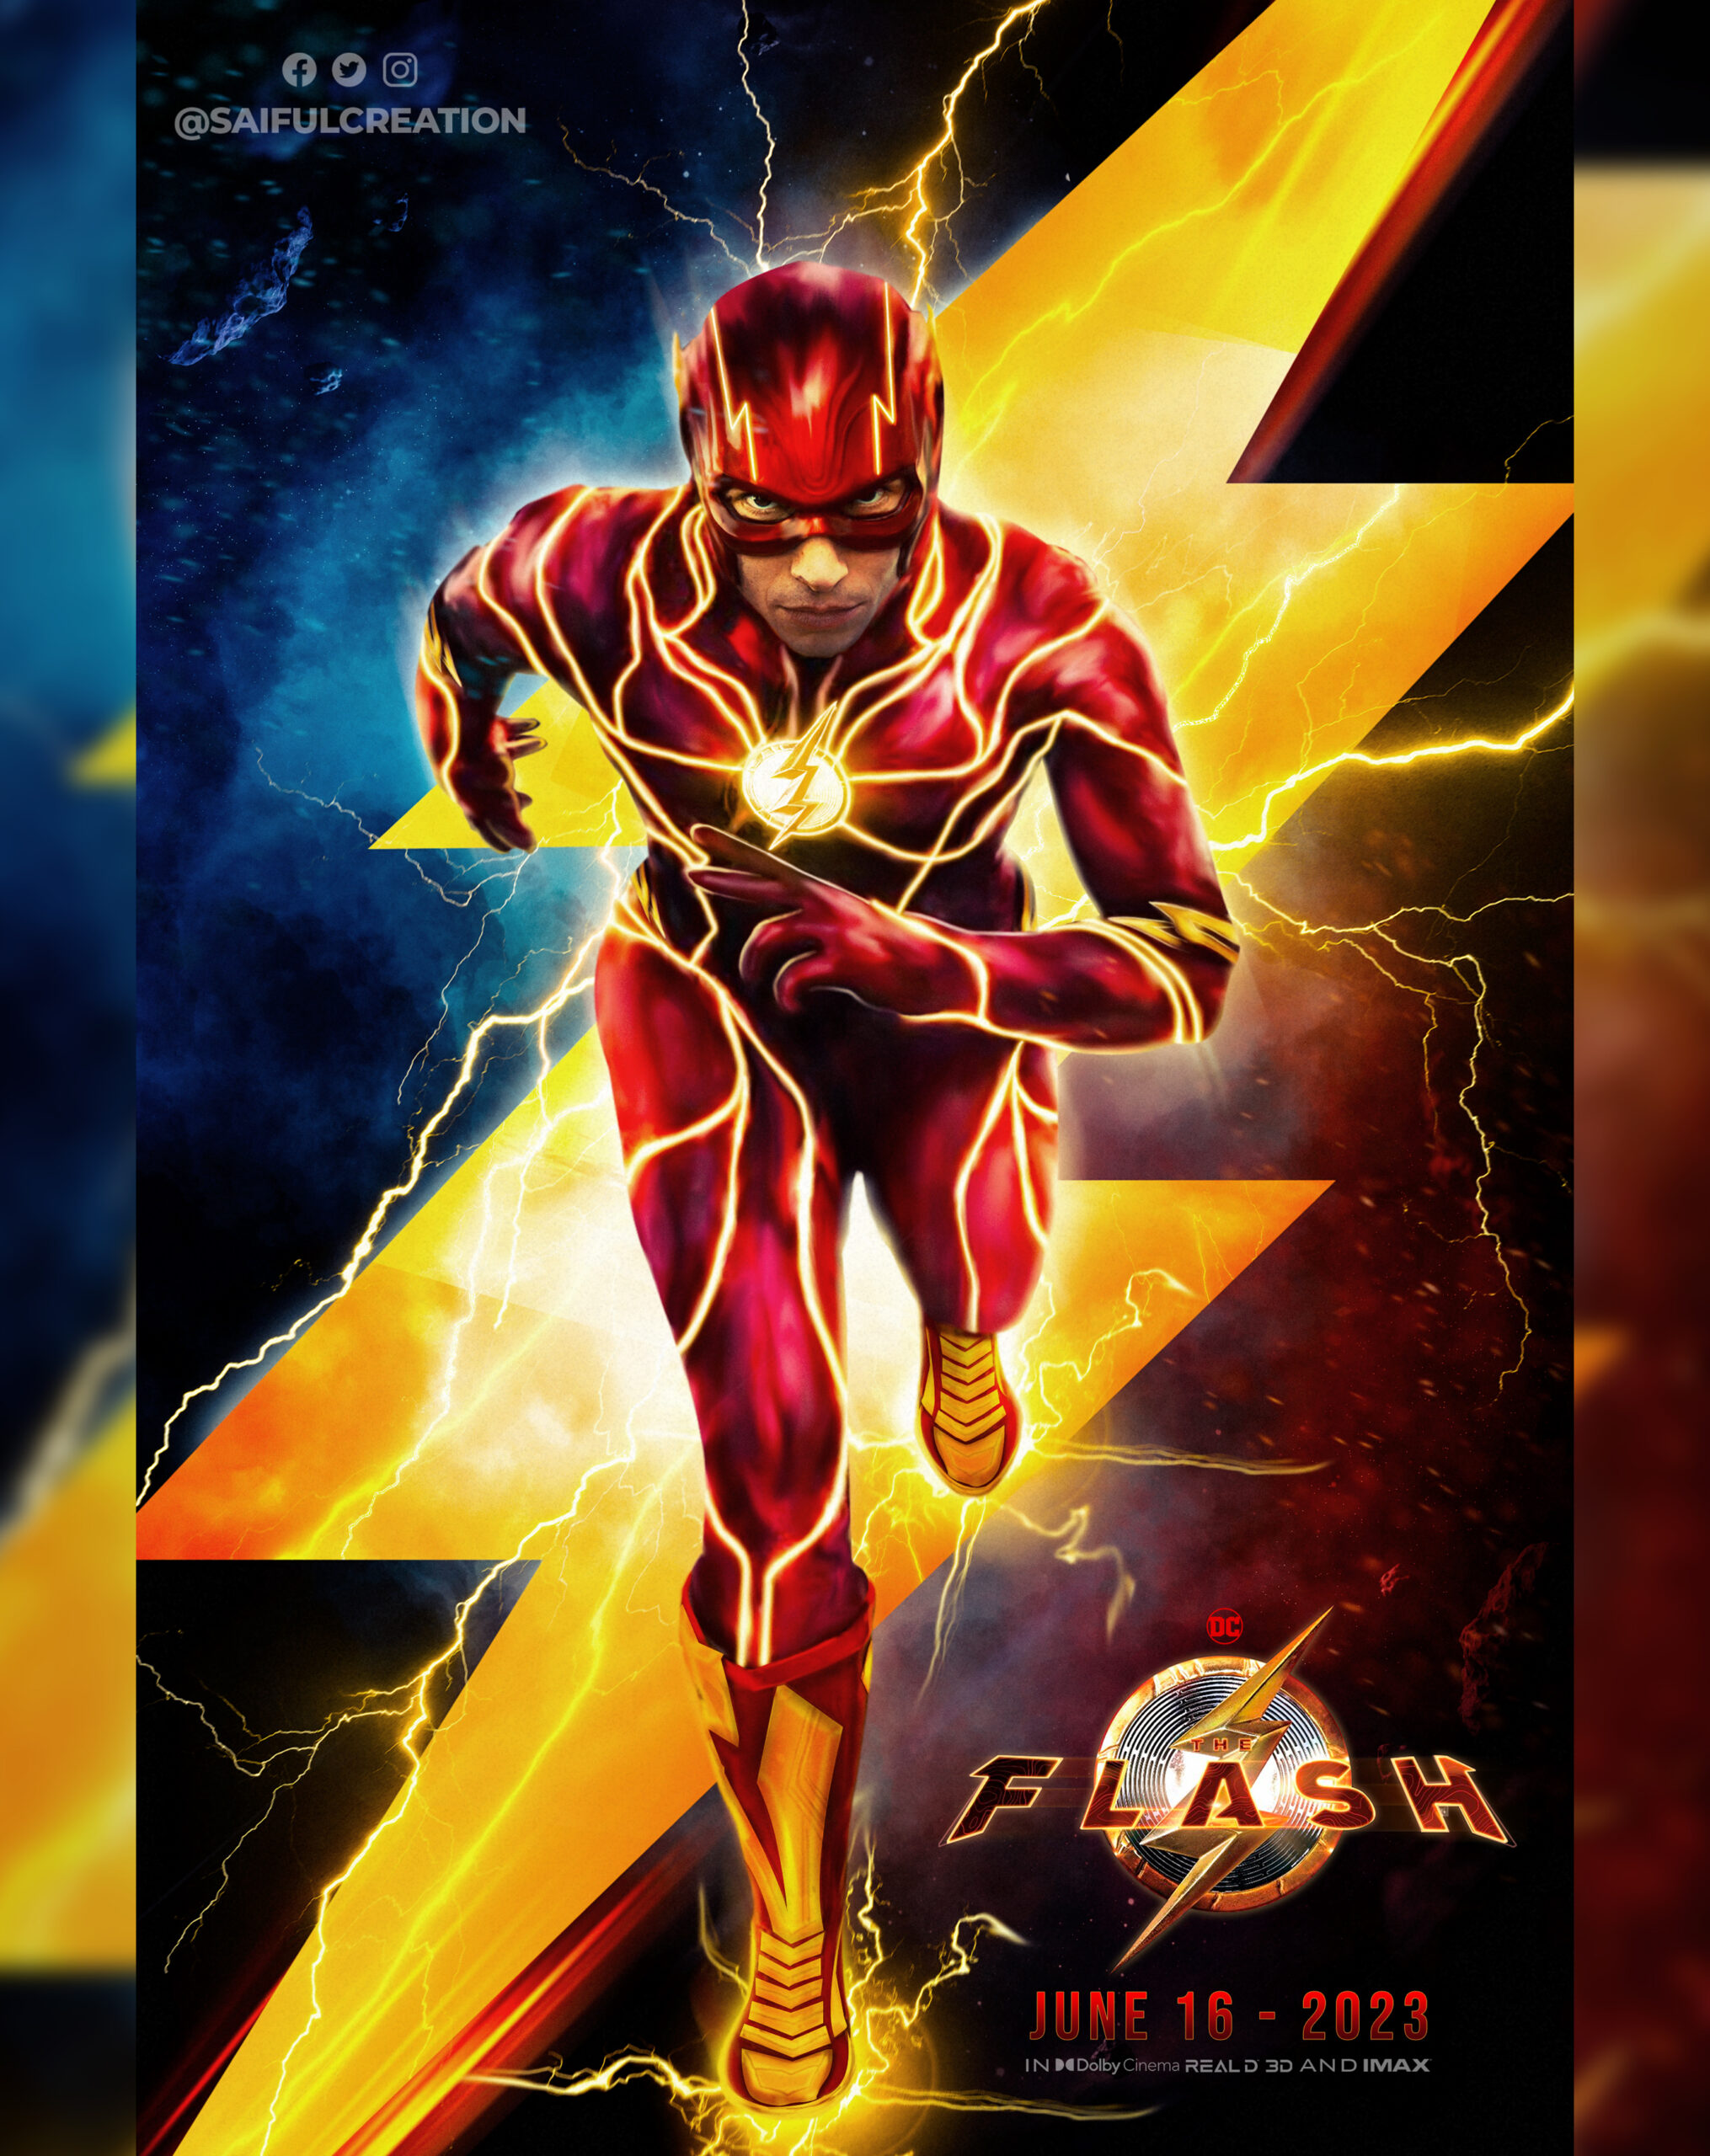 The Flash Movie Poster Saifulcreation PosterSpy